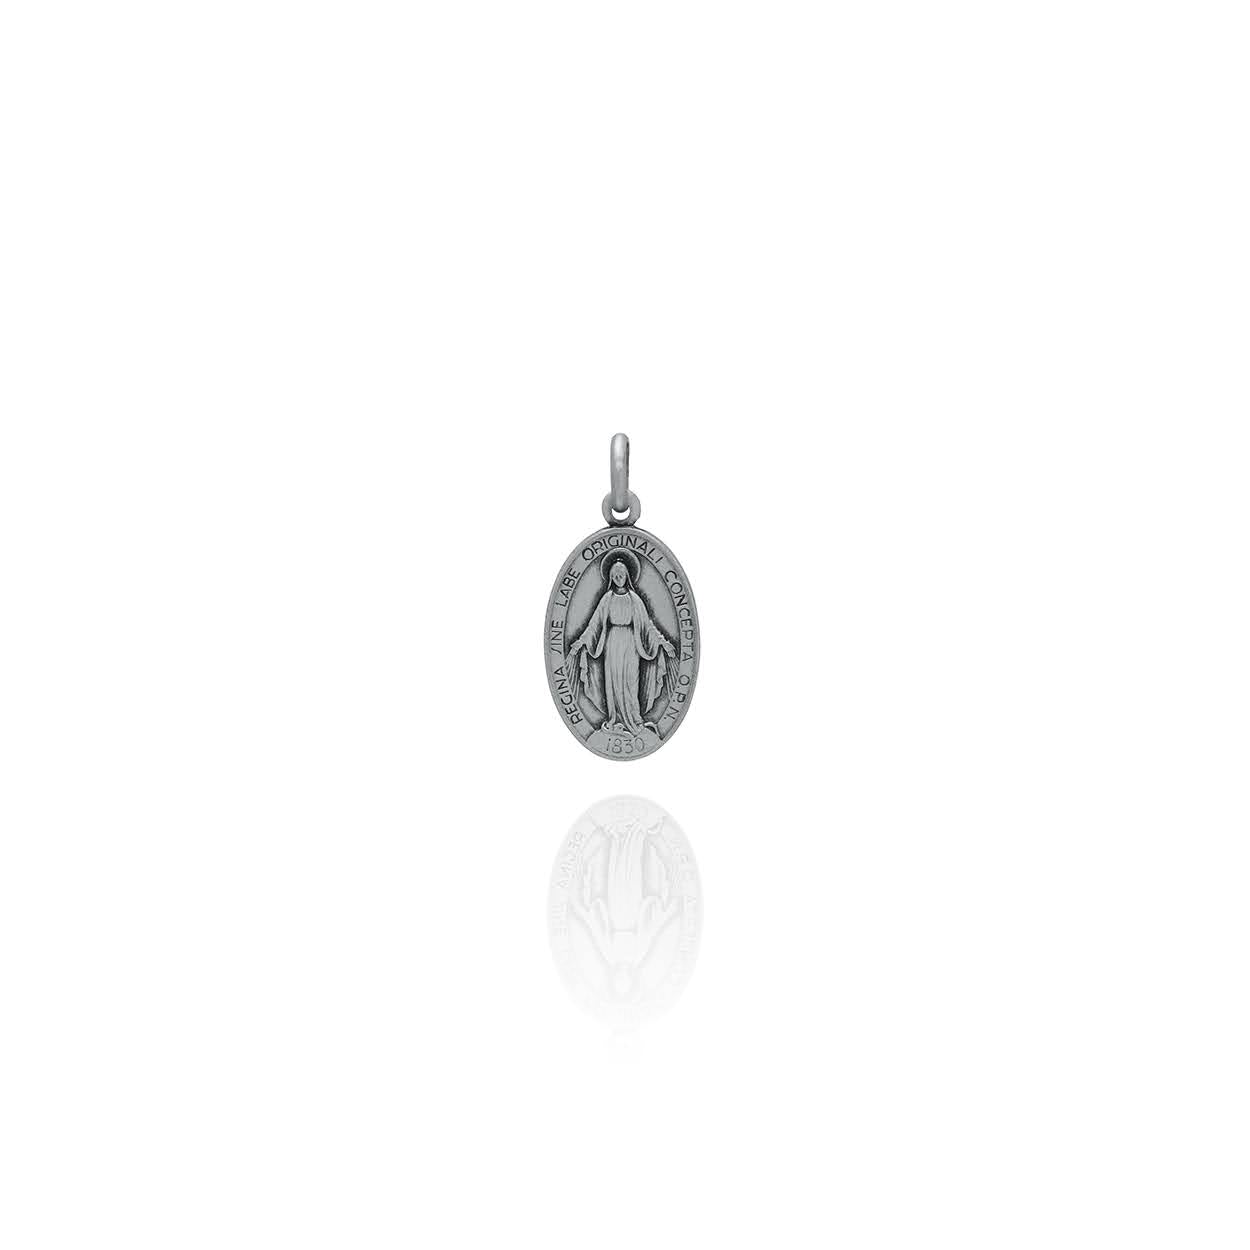 Small Sterling Silver Mother Mary Immaculate Medallion